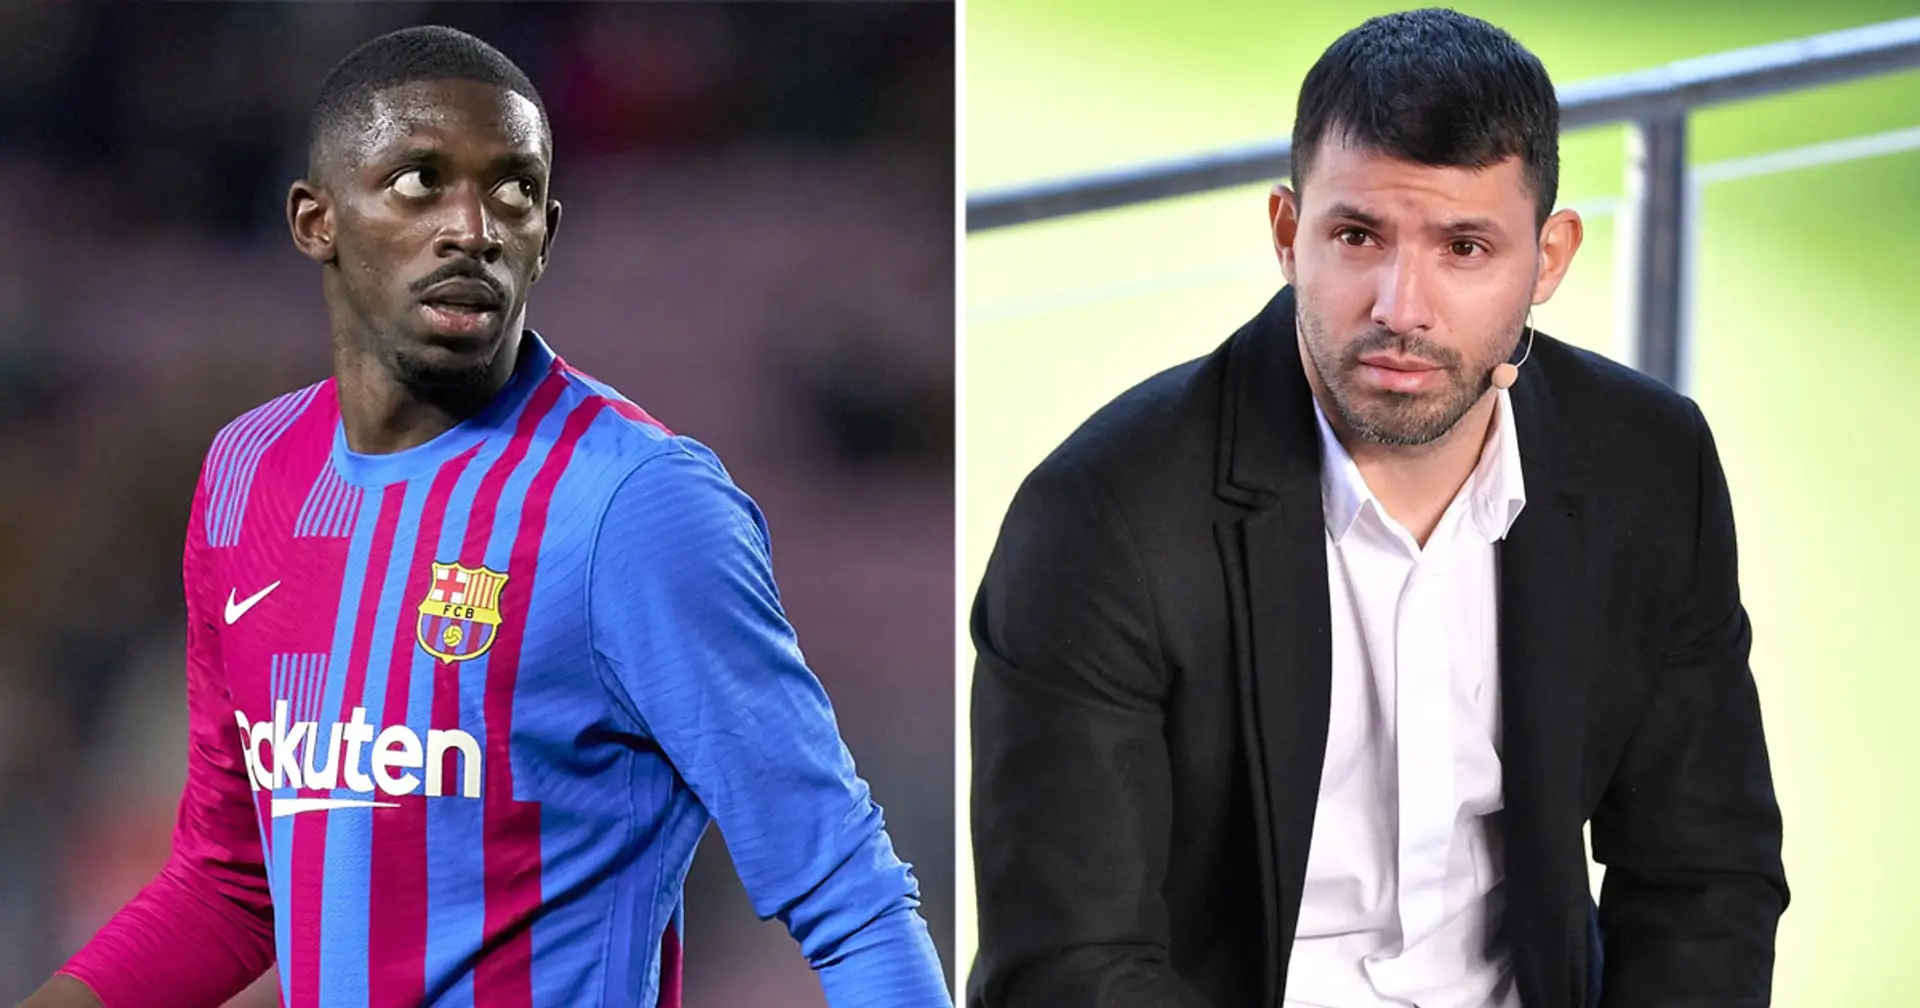 Dembele didn't attend Aguero's farewell, possible reason revealed by reporters